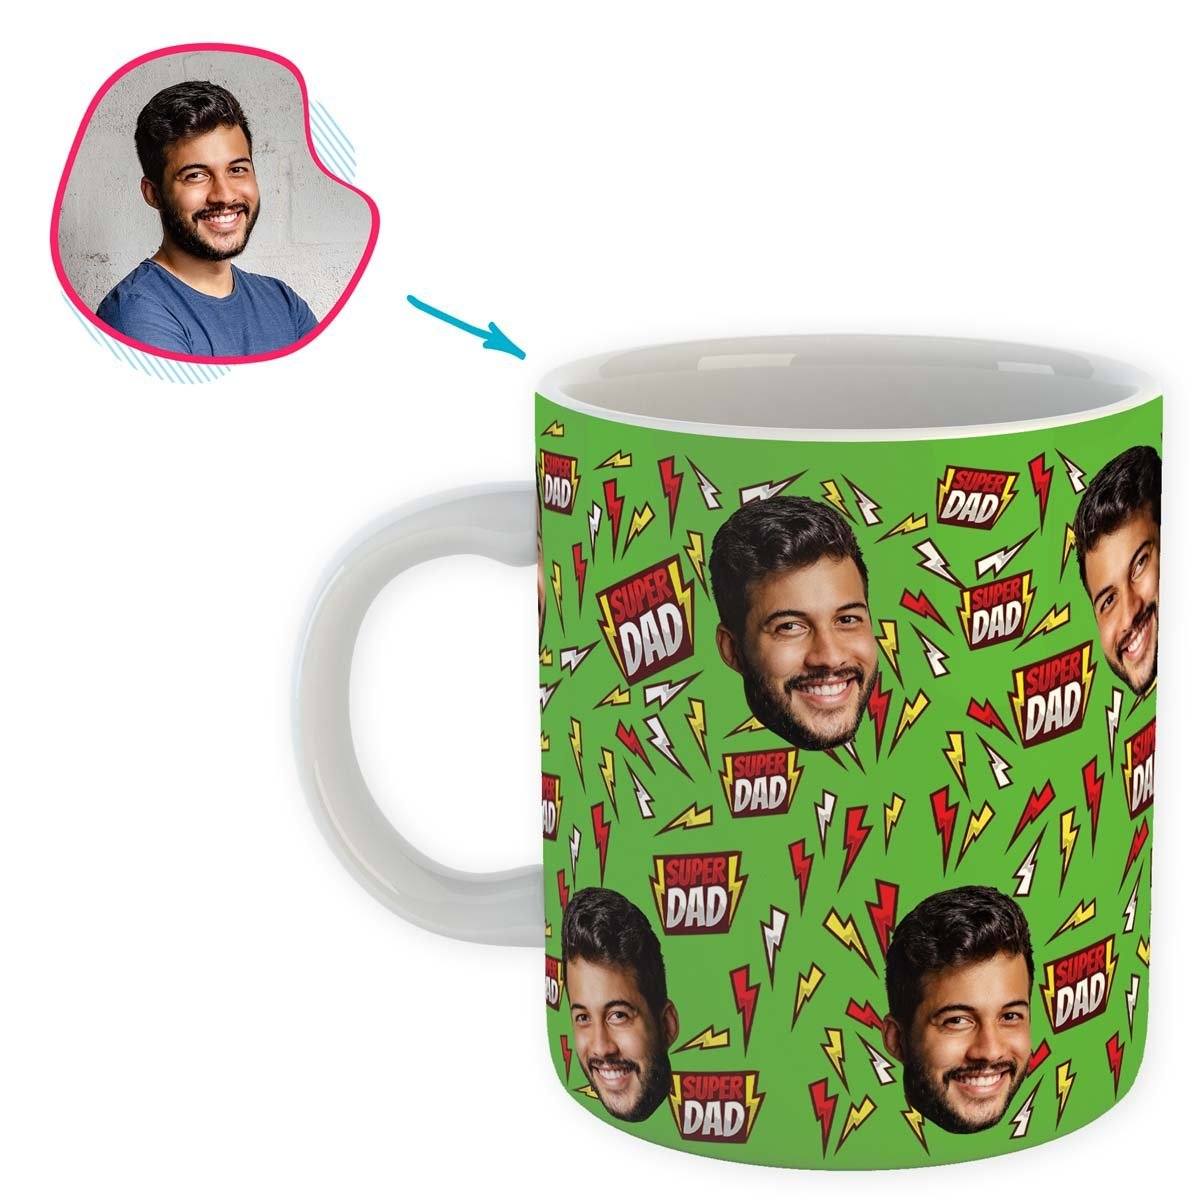 green Super Dad mug personalized with photo of face printed on it